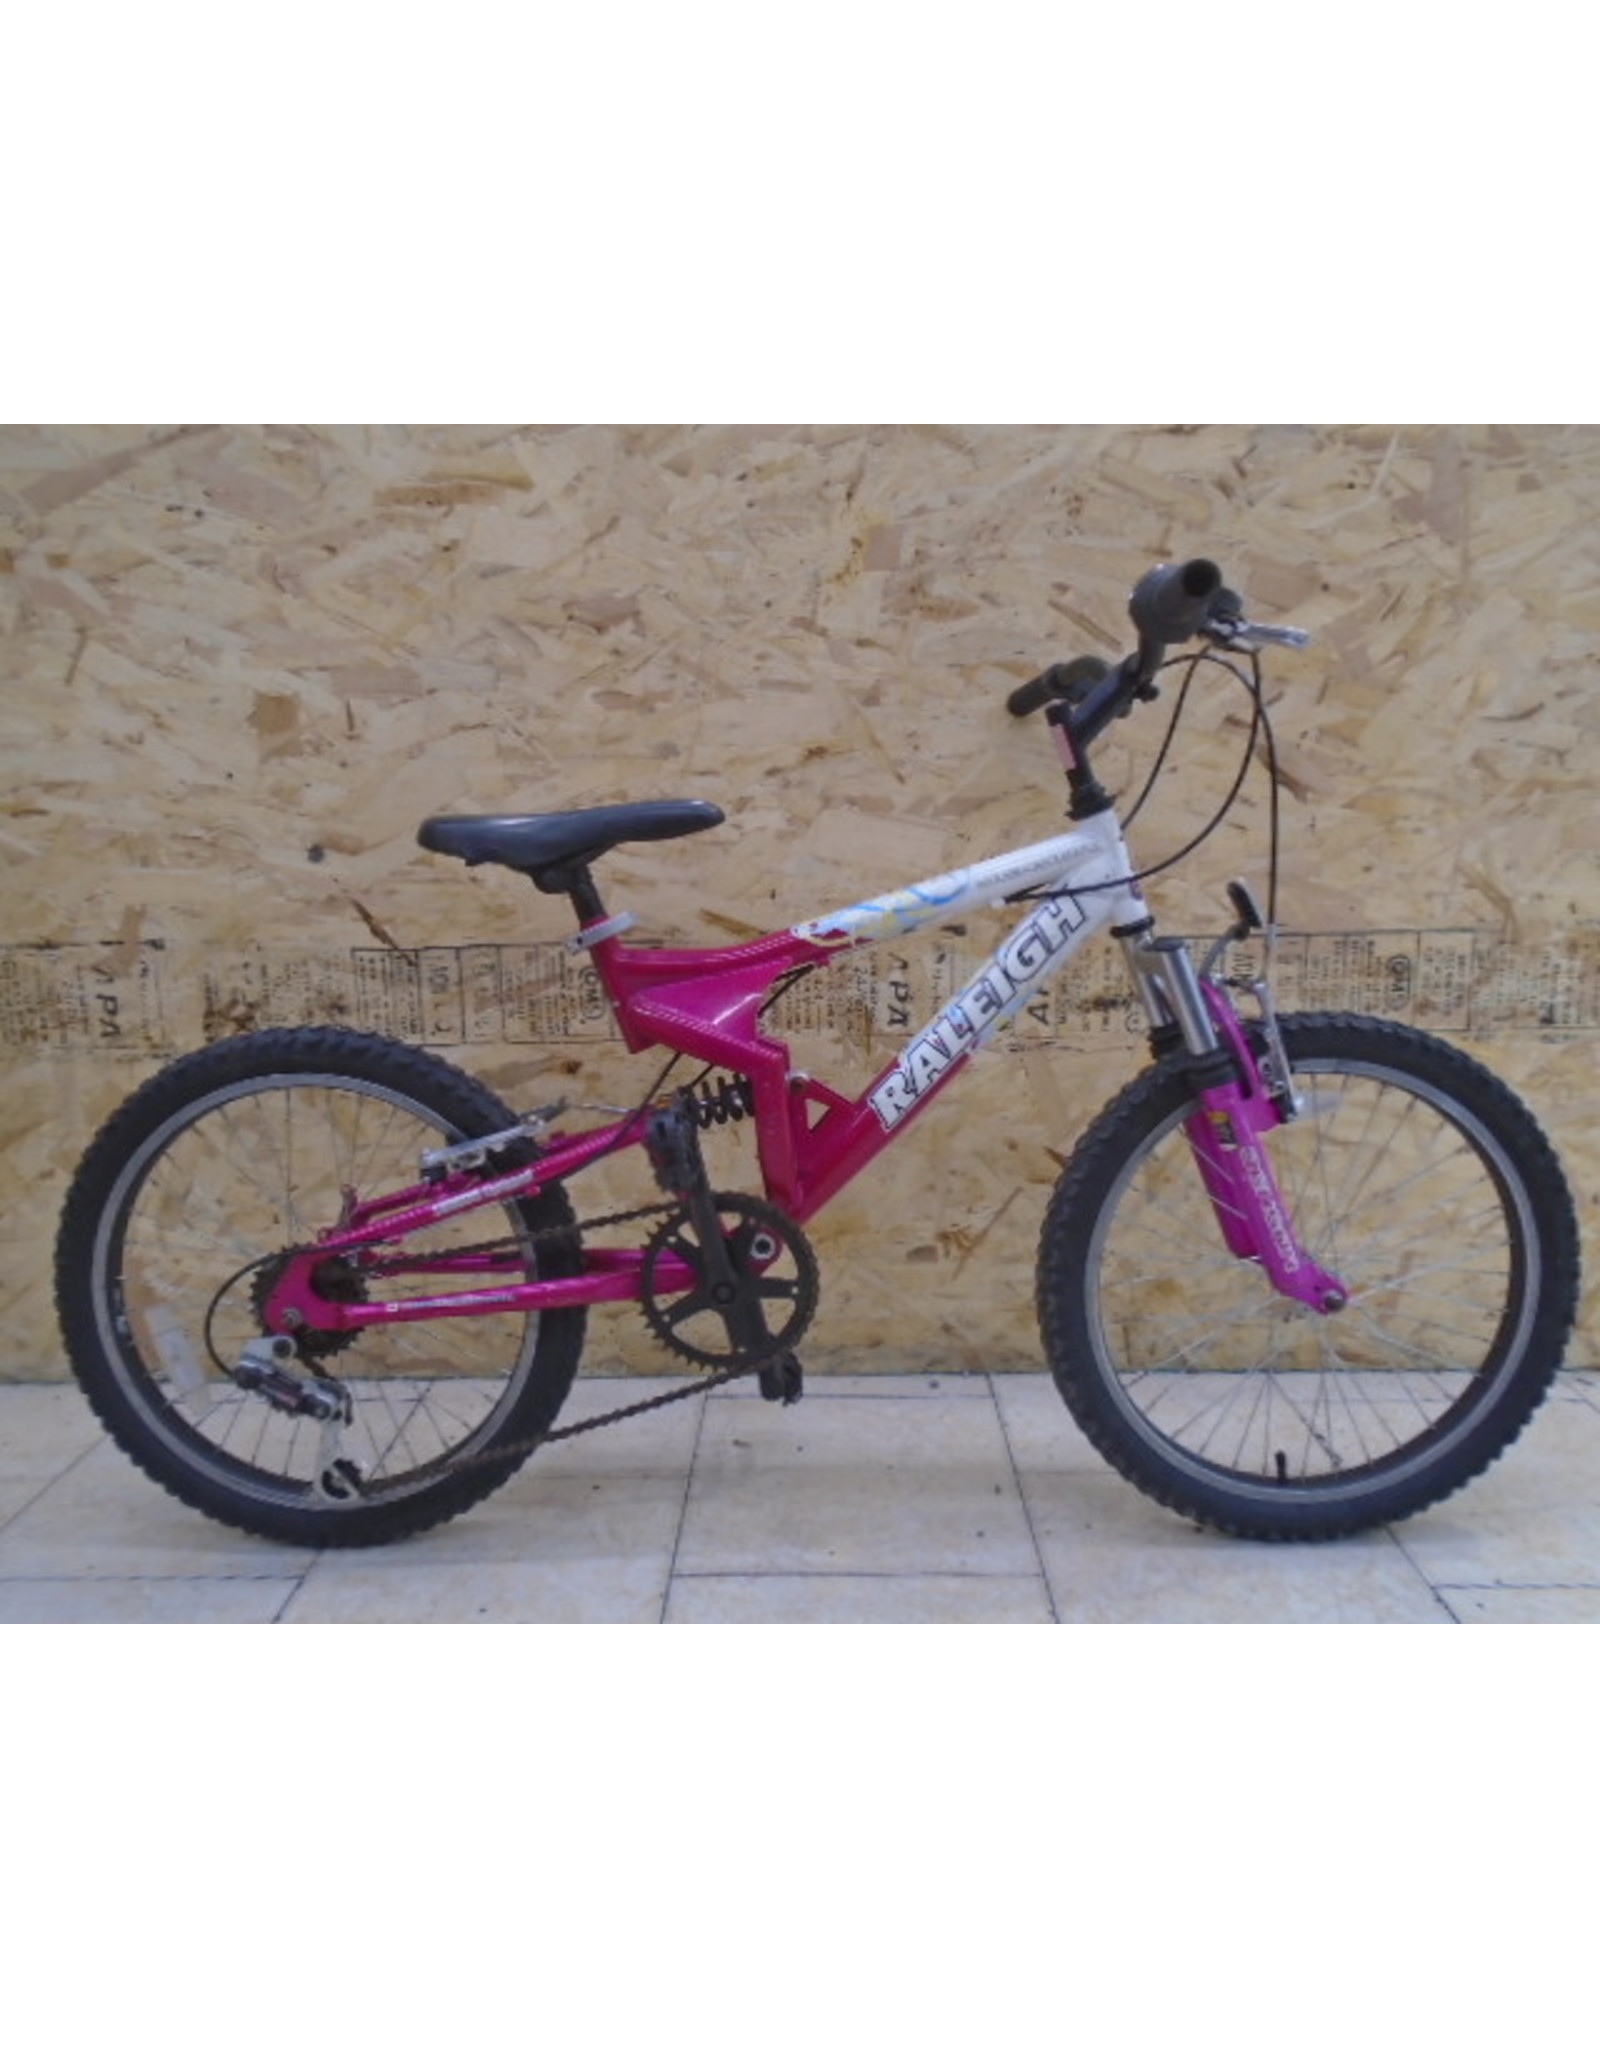 used children's bicycles for sale